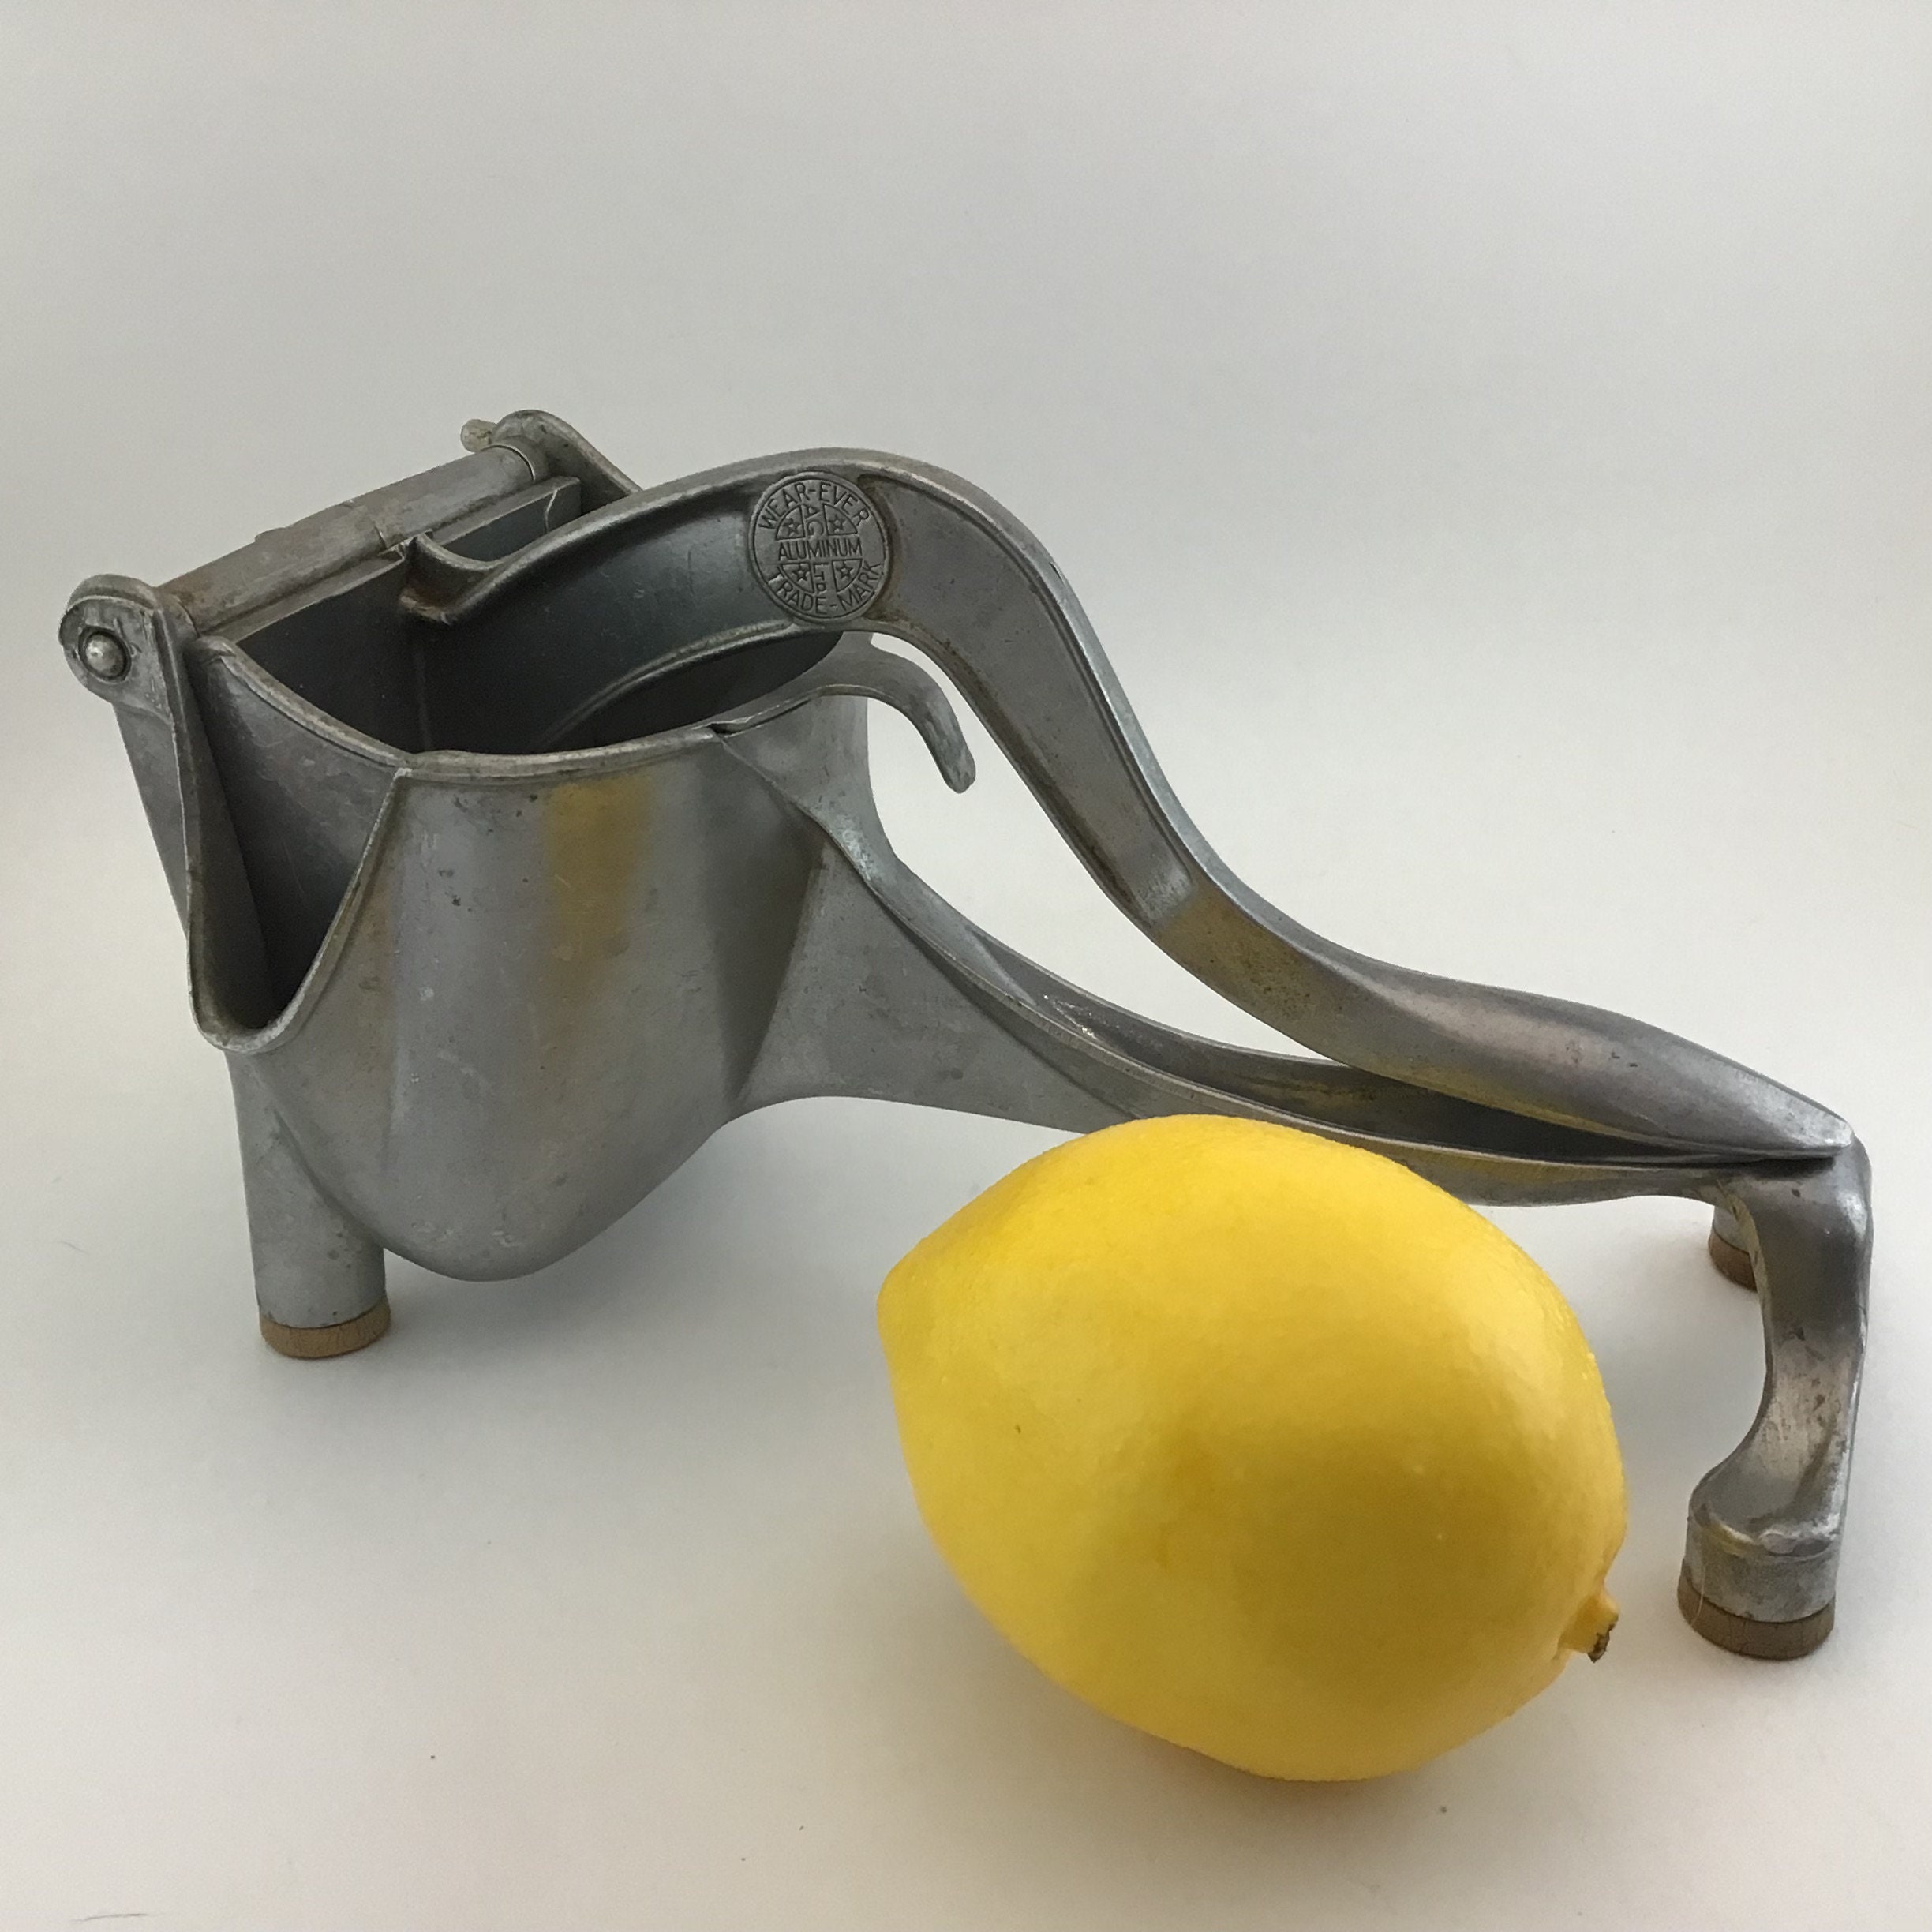 Mexican Lemon Squeezer Premium Single Press Manual Juicer Authentic Mexican  Style Heavy Duty Easy to Use Lemon Lime Juicer Exprimidor Limon 